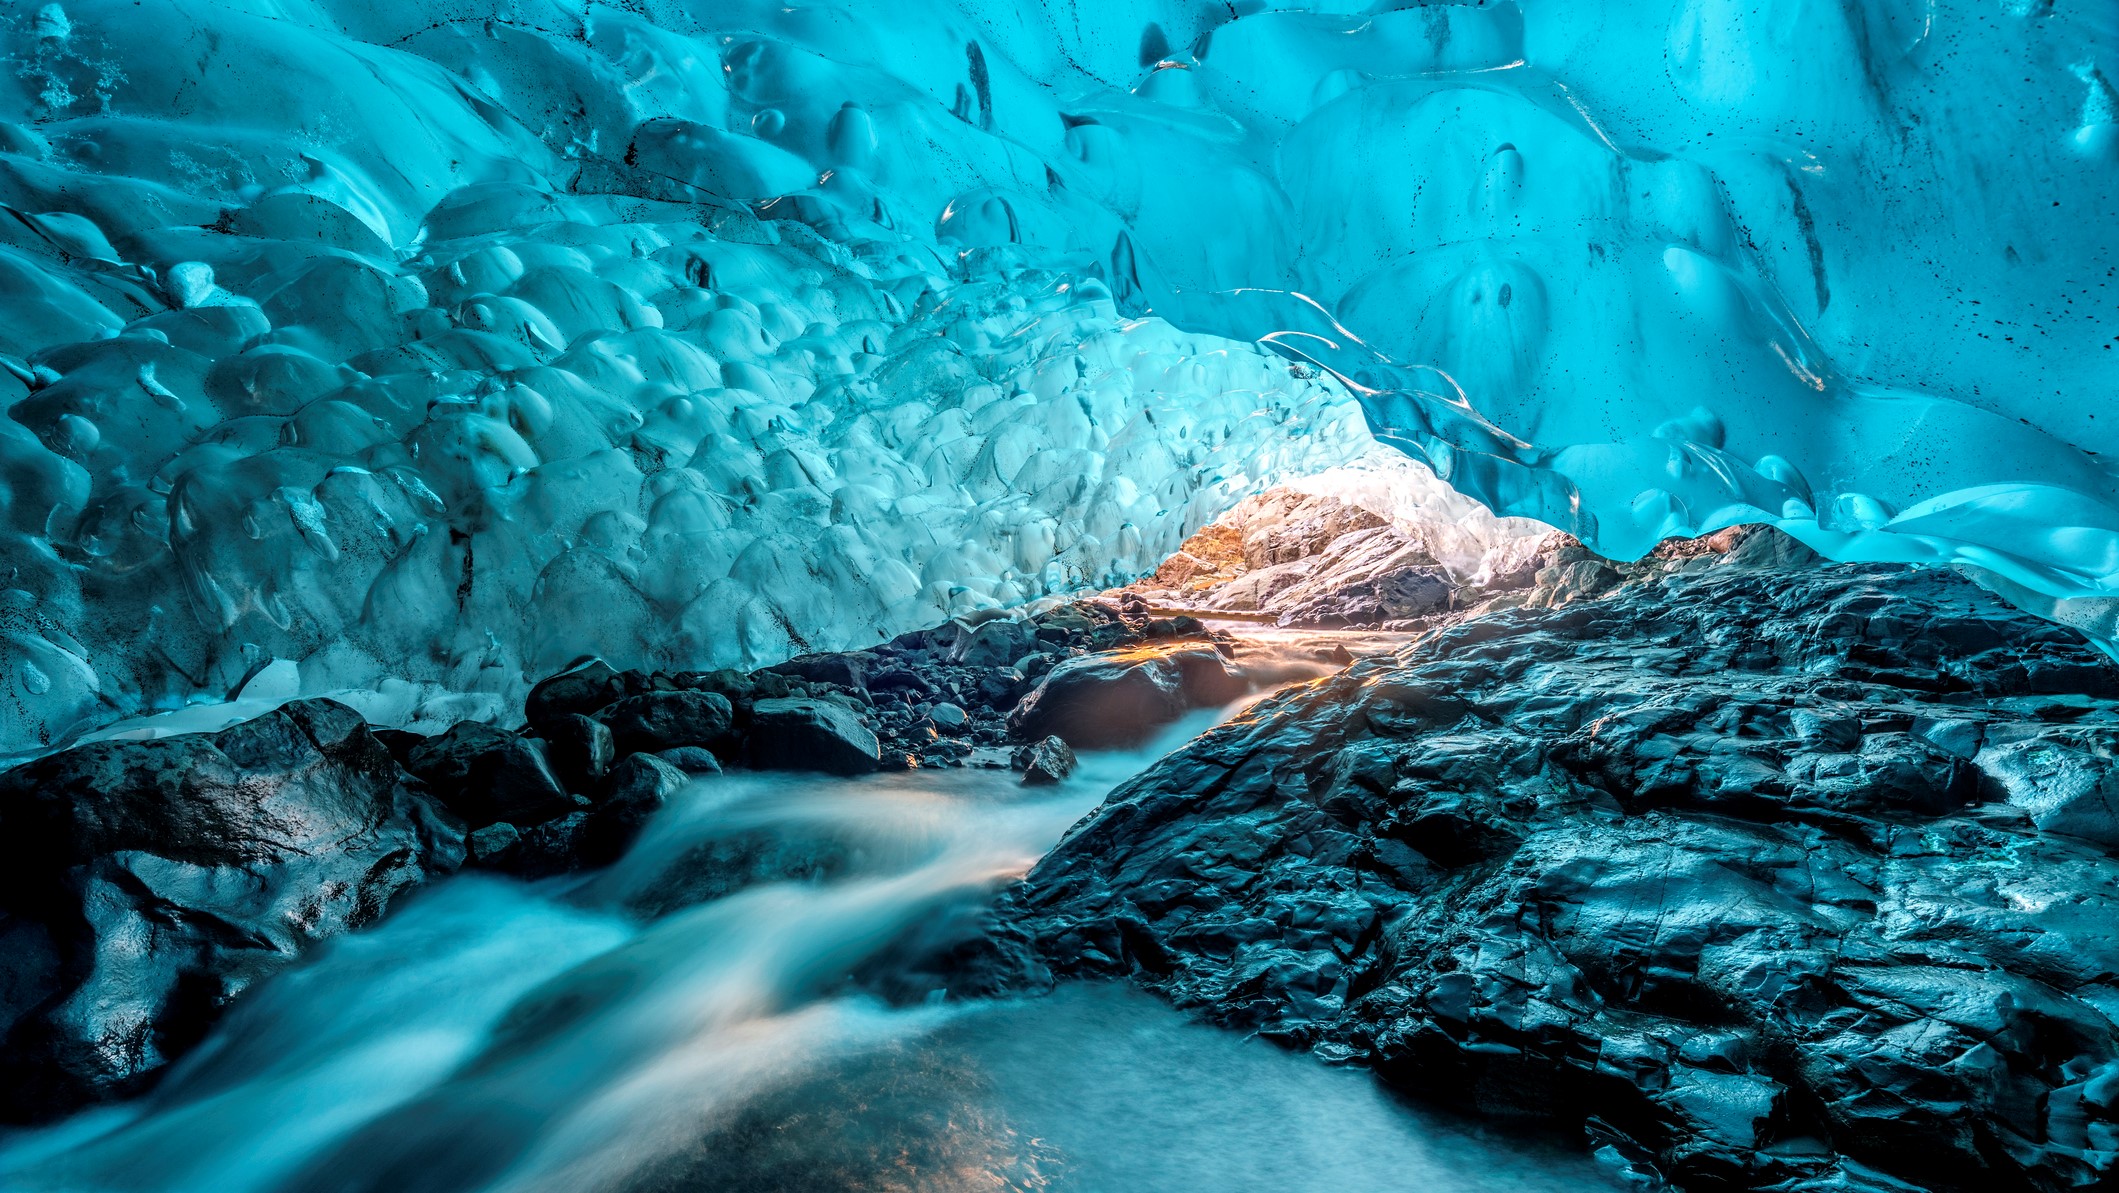 Underneath Vatnajokull glacier in Iceland. The ice cave has water cascading down rocks in the foreground and the walls and roof are made of ice.